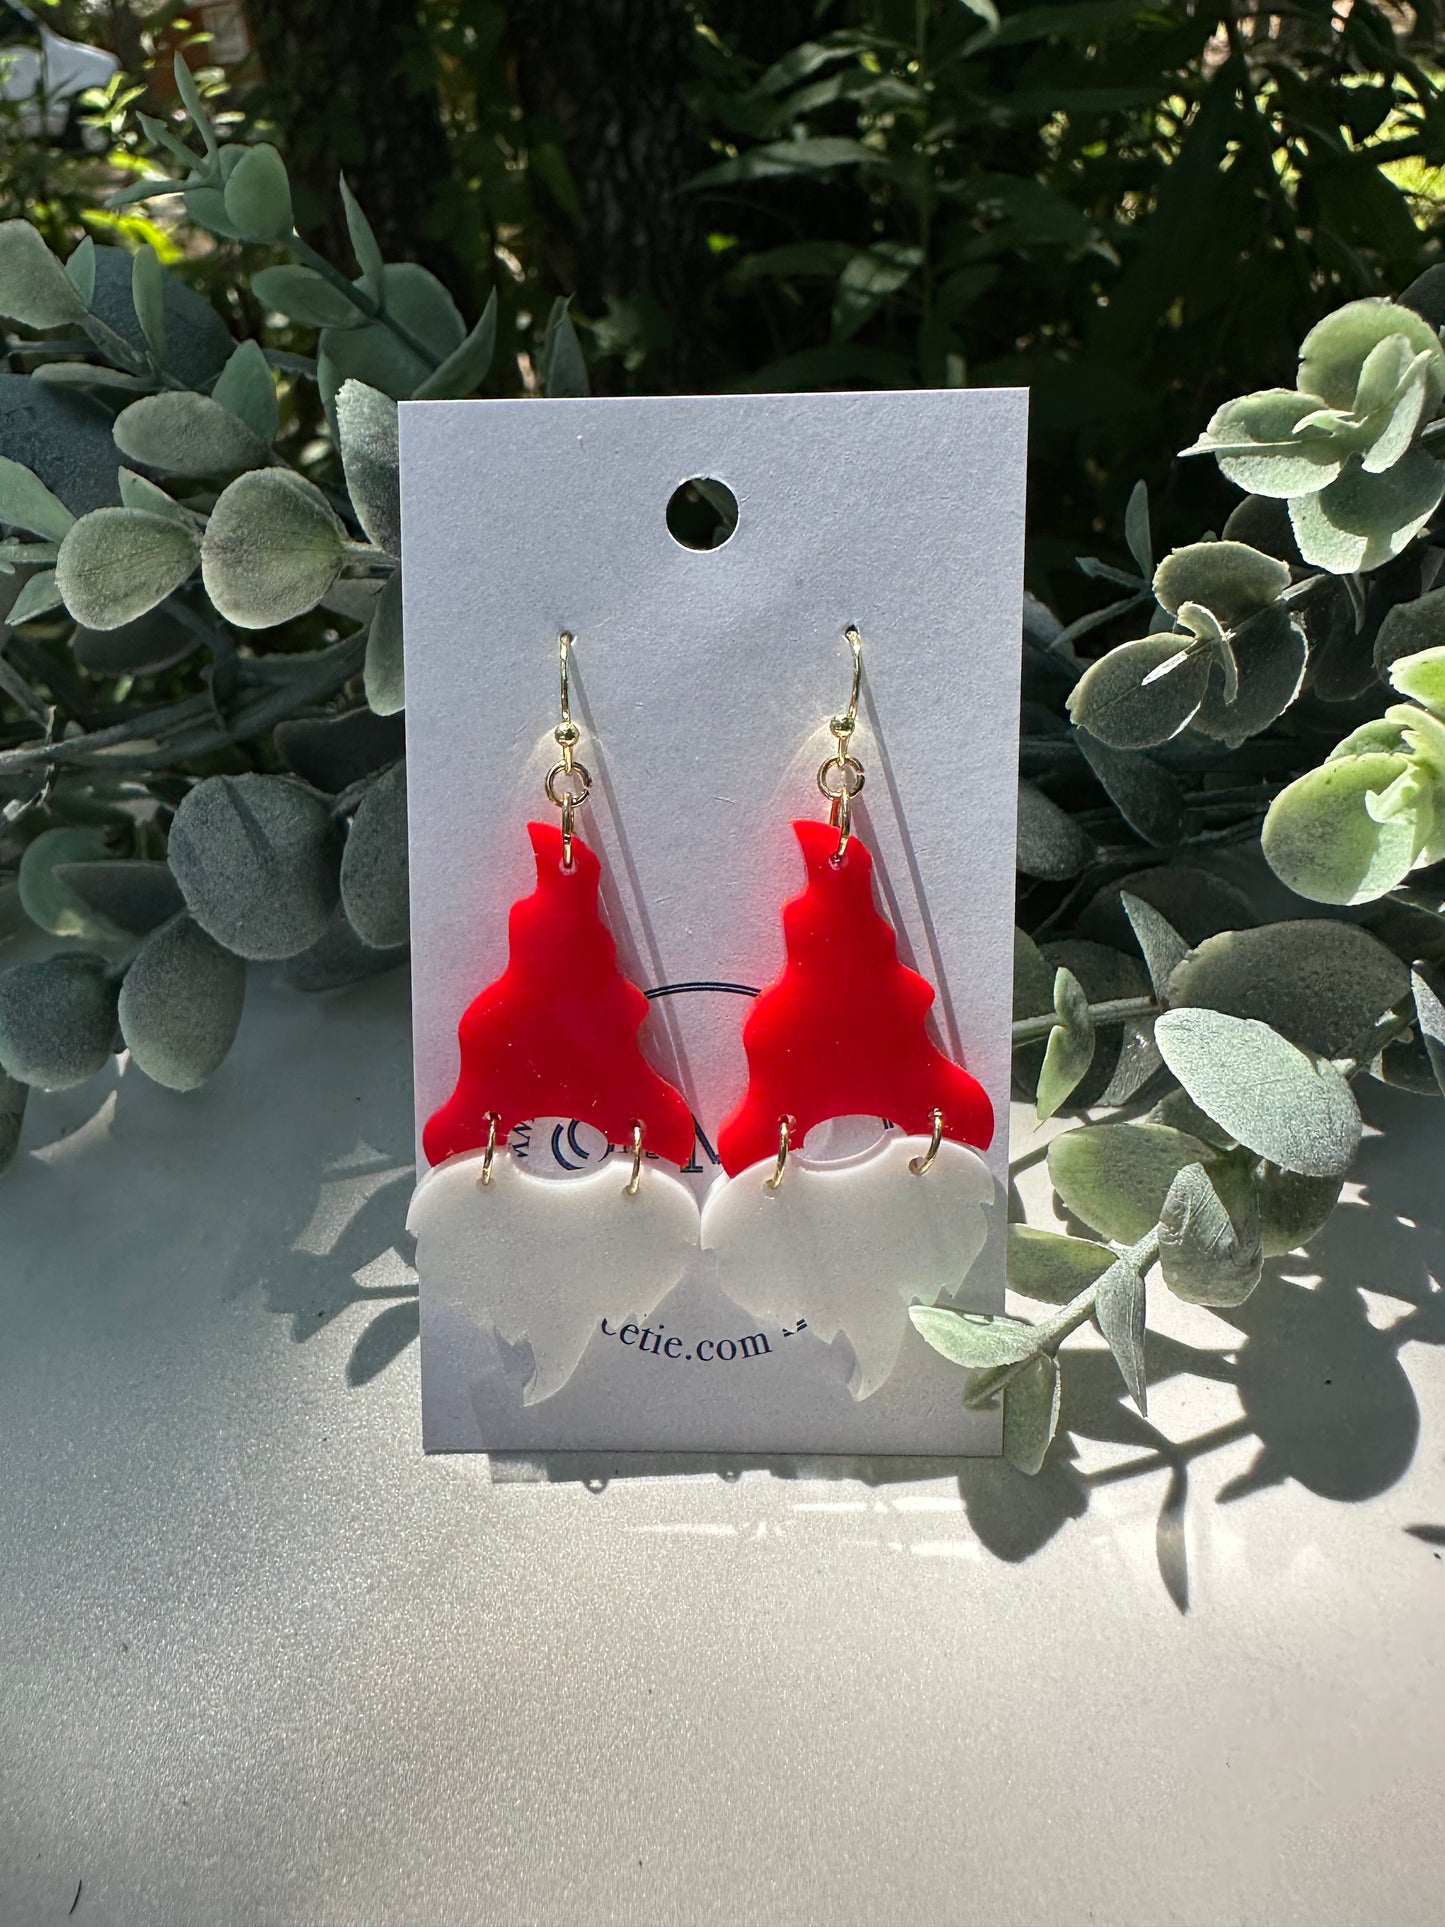 Holiday Gnome Earrings